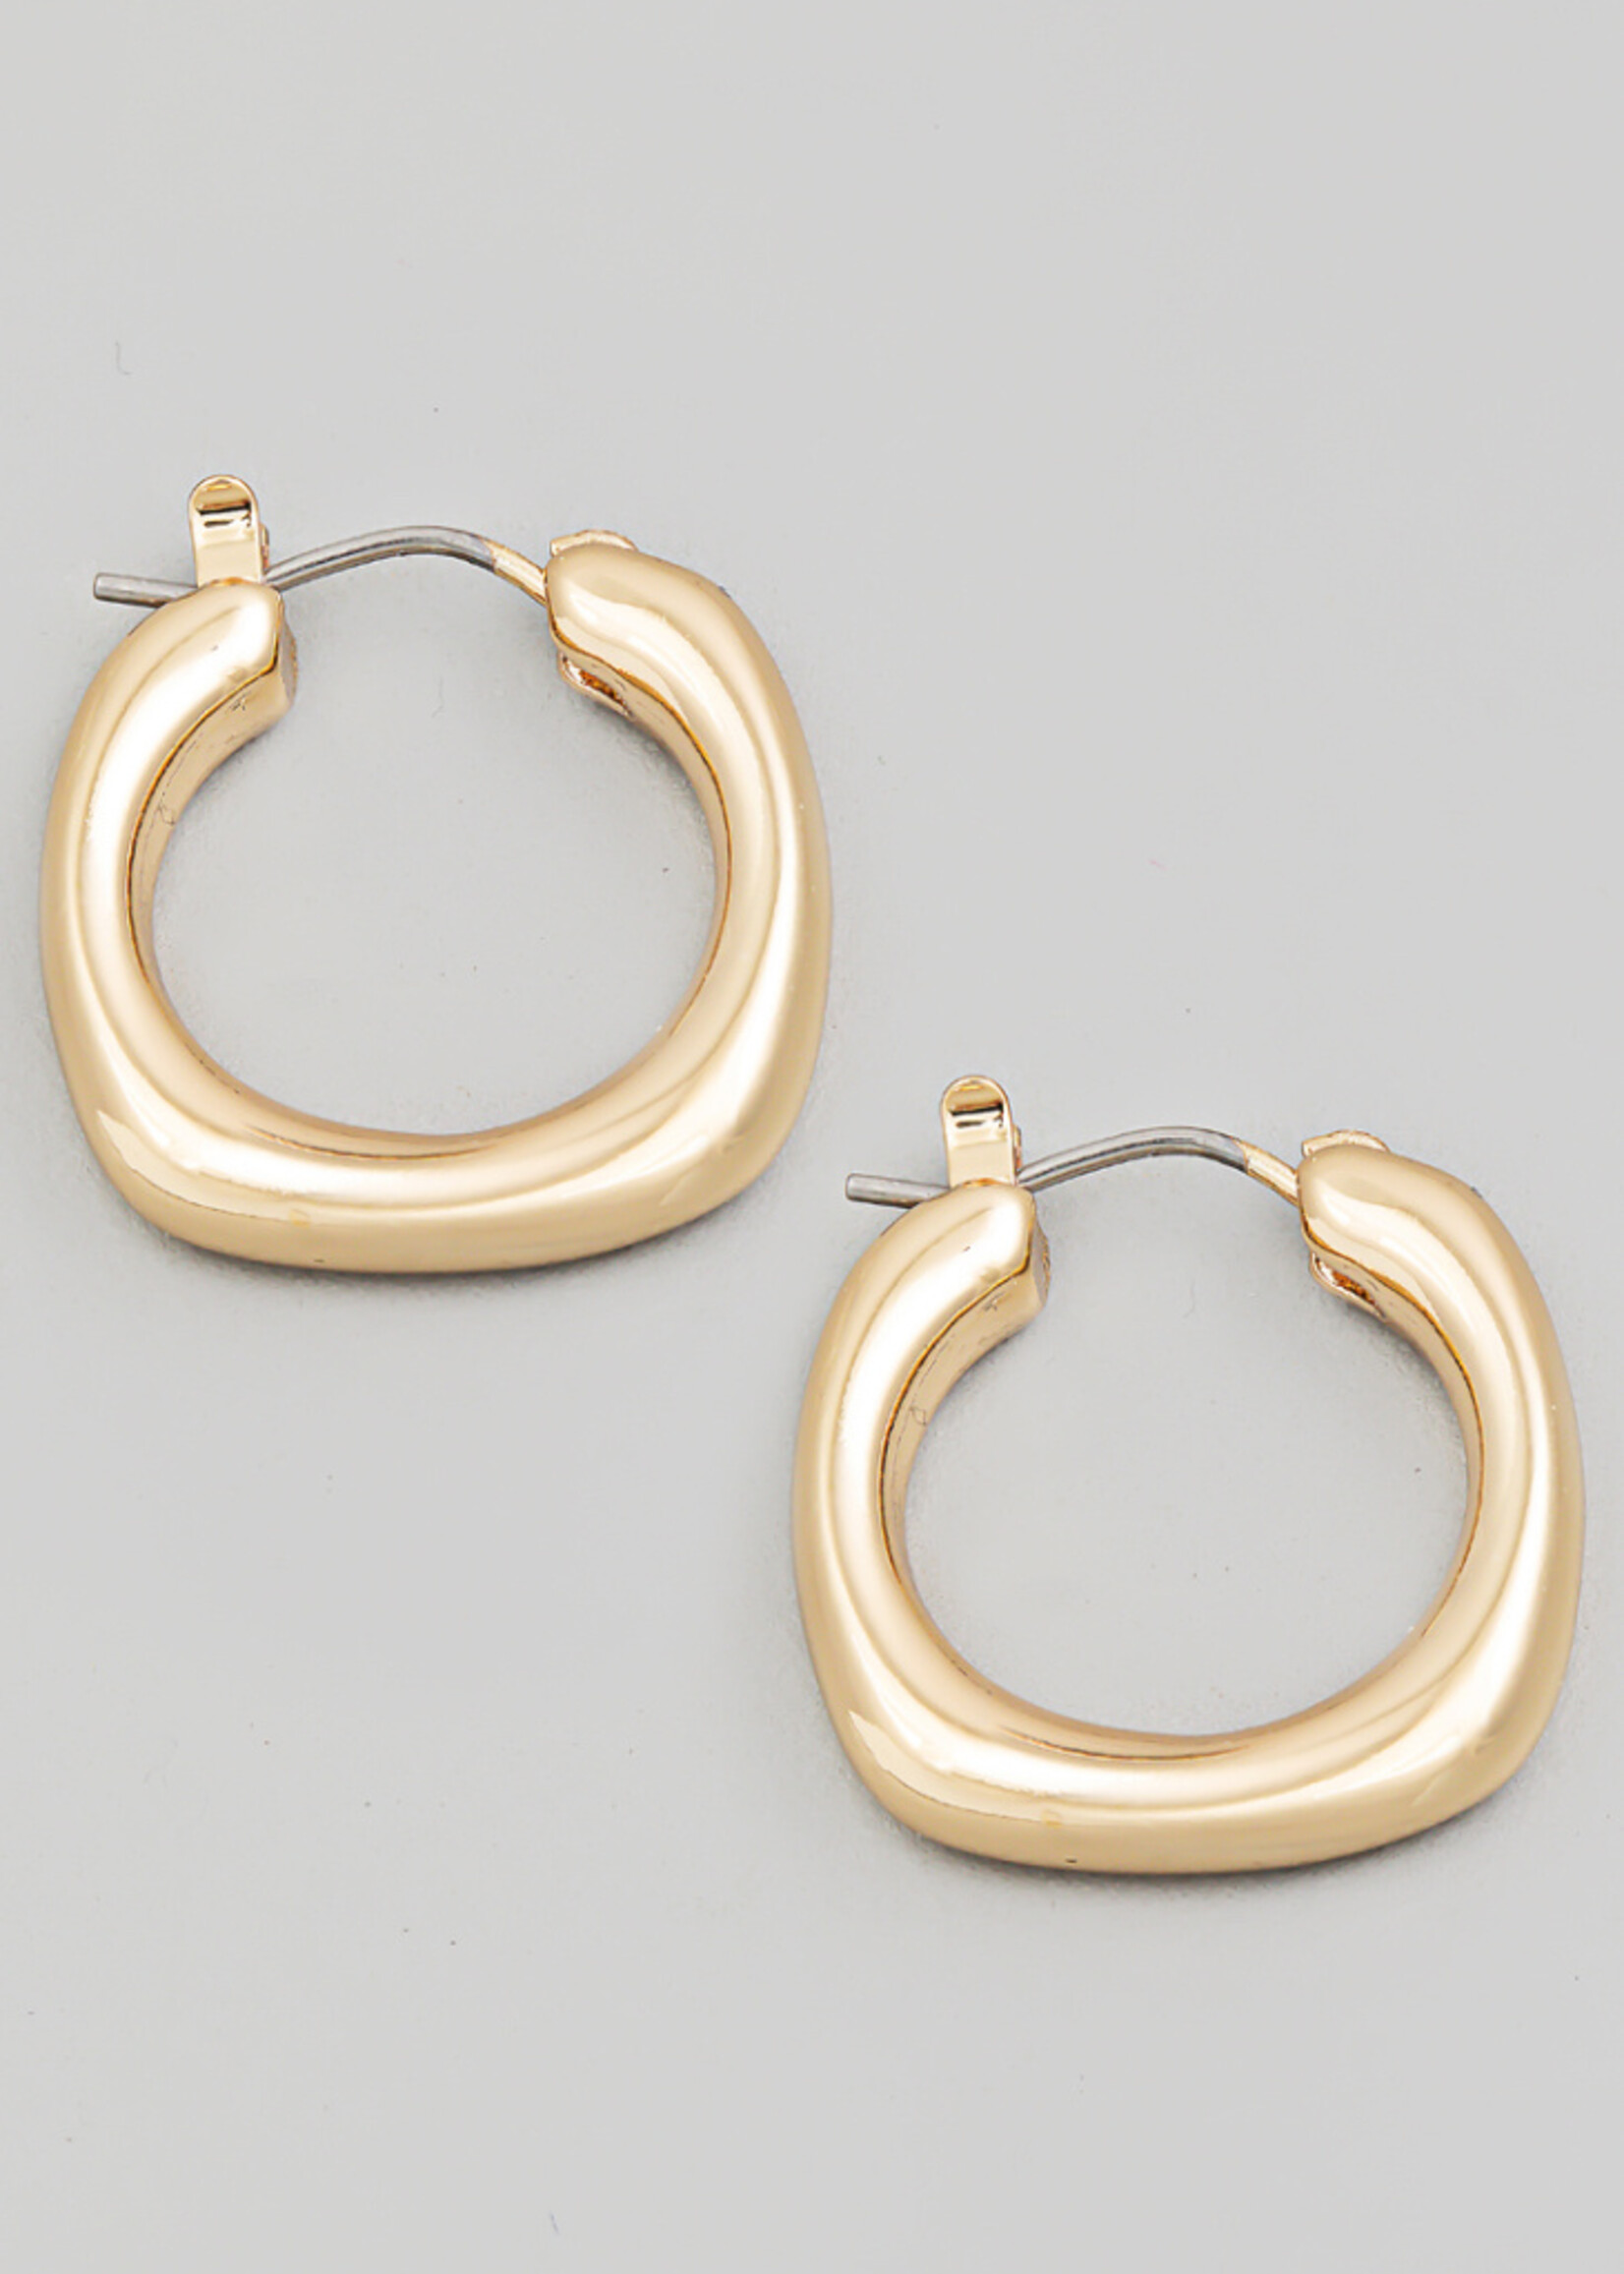 Fame Accessories GLD Square Earrings